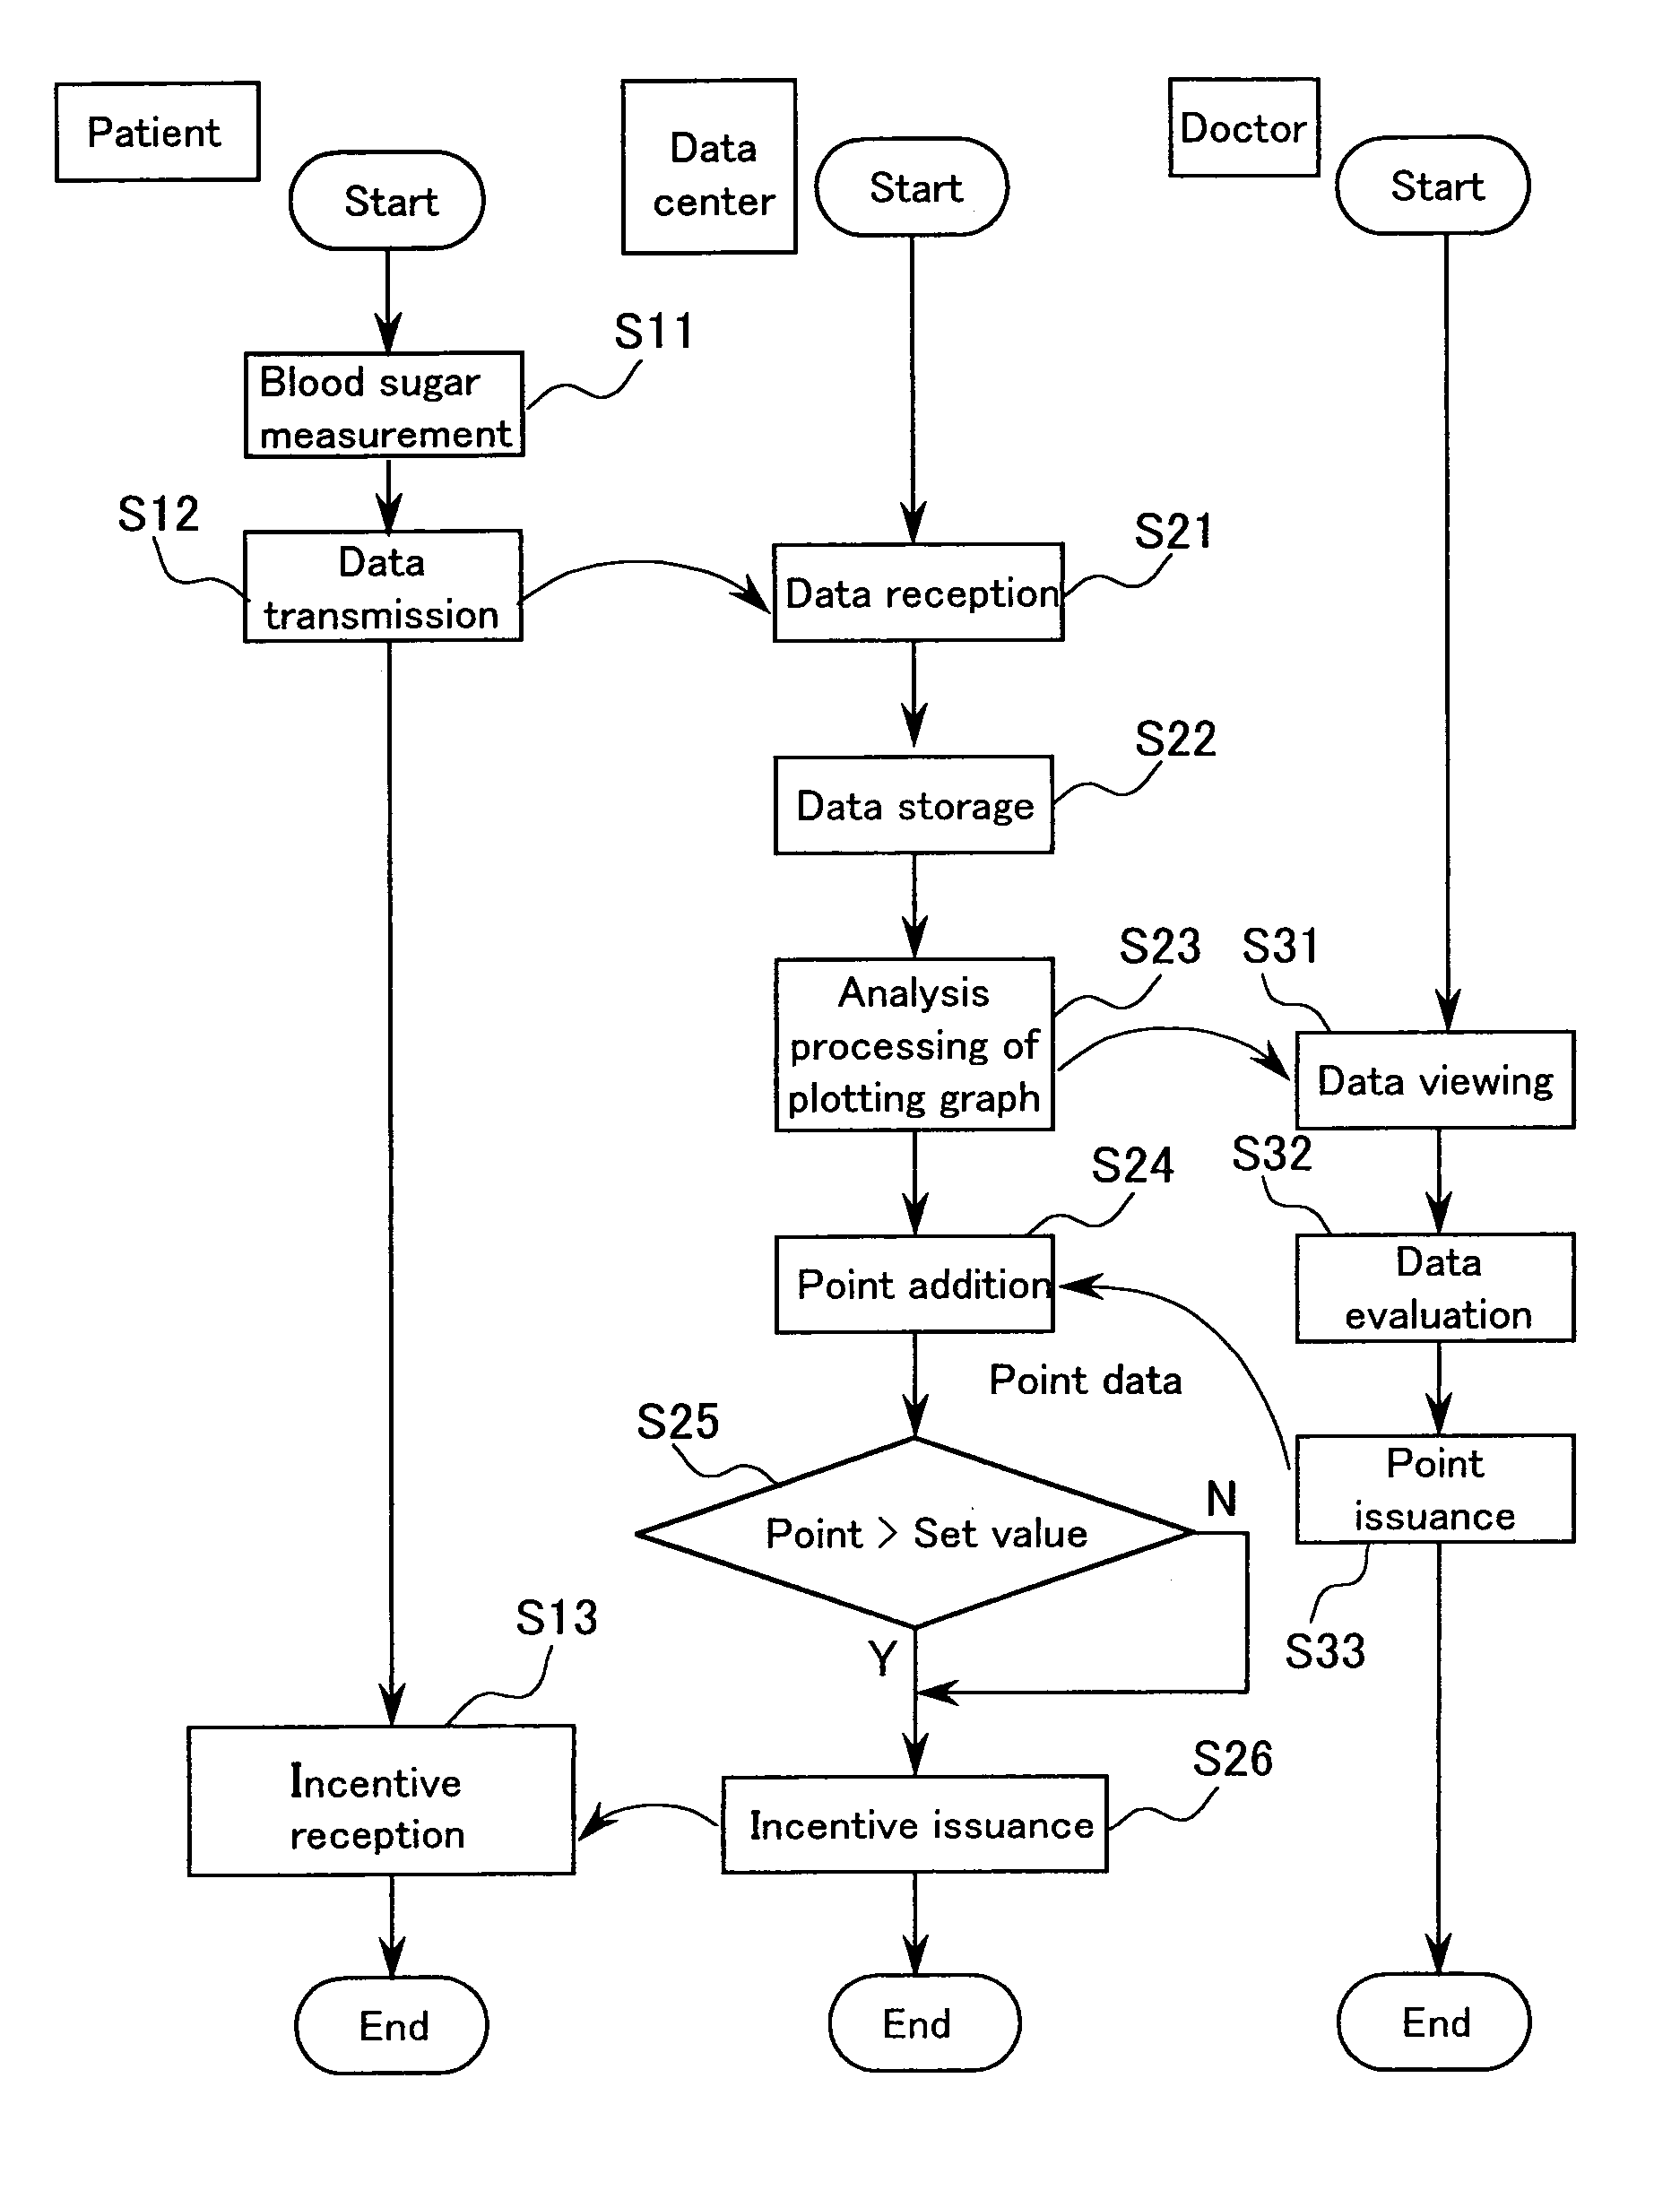 Measurement assisting device and measuring device using the same